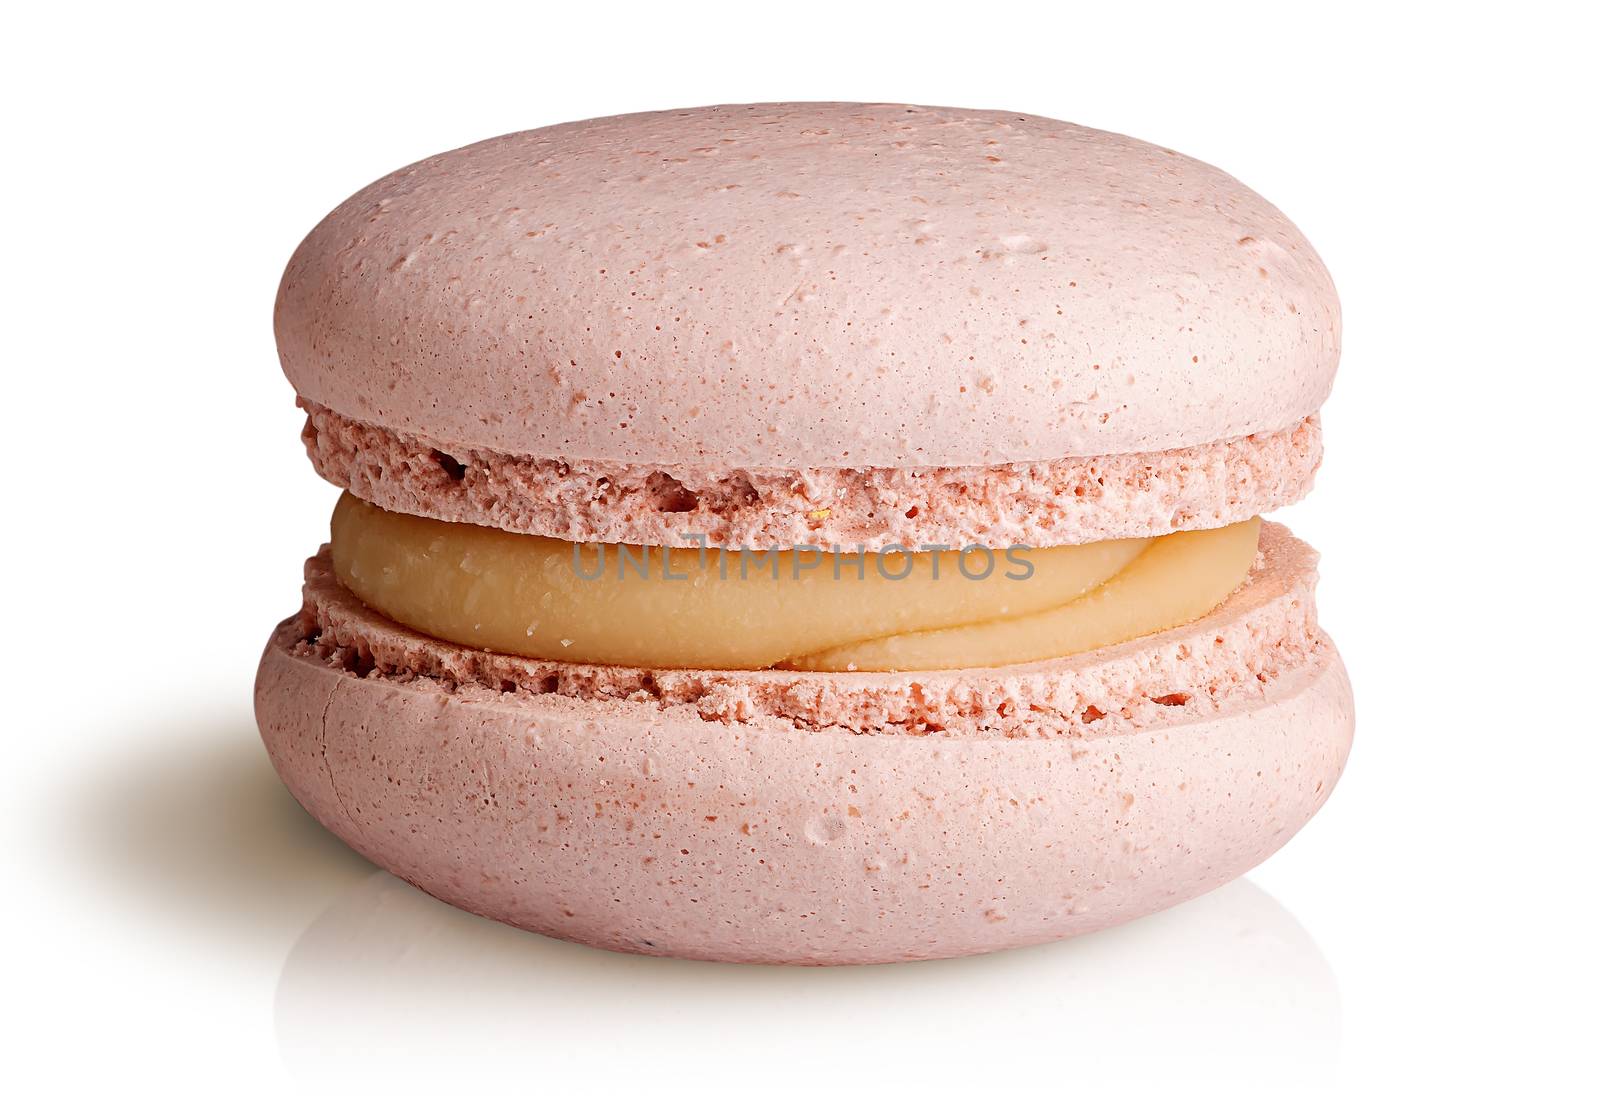 One beige macaroon front view by Cipariss